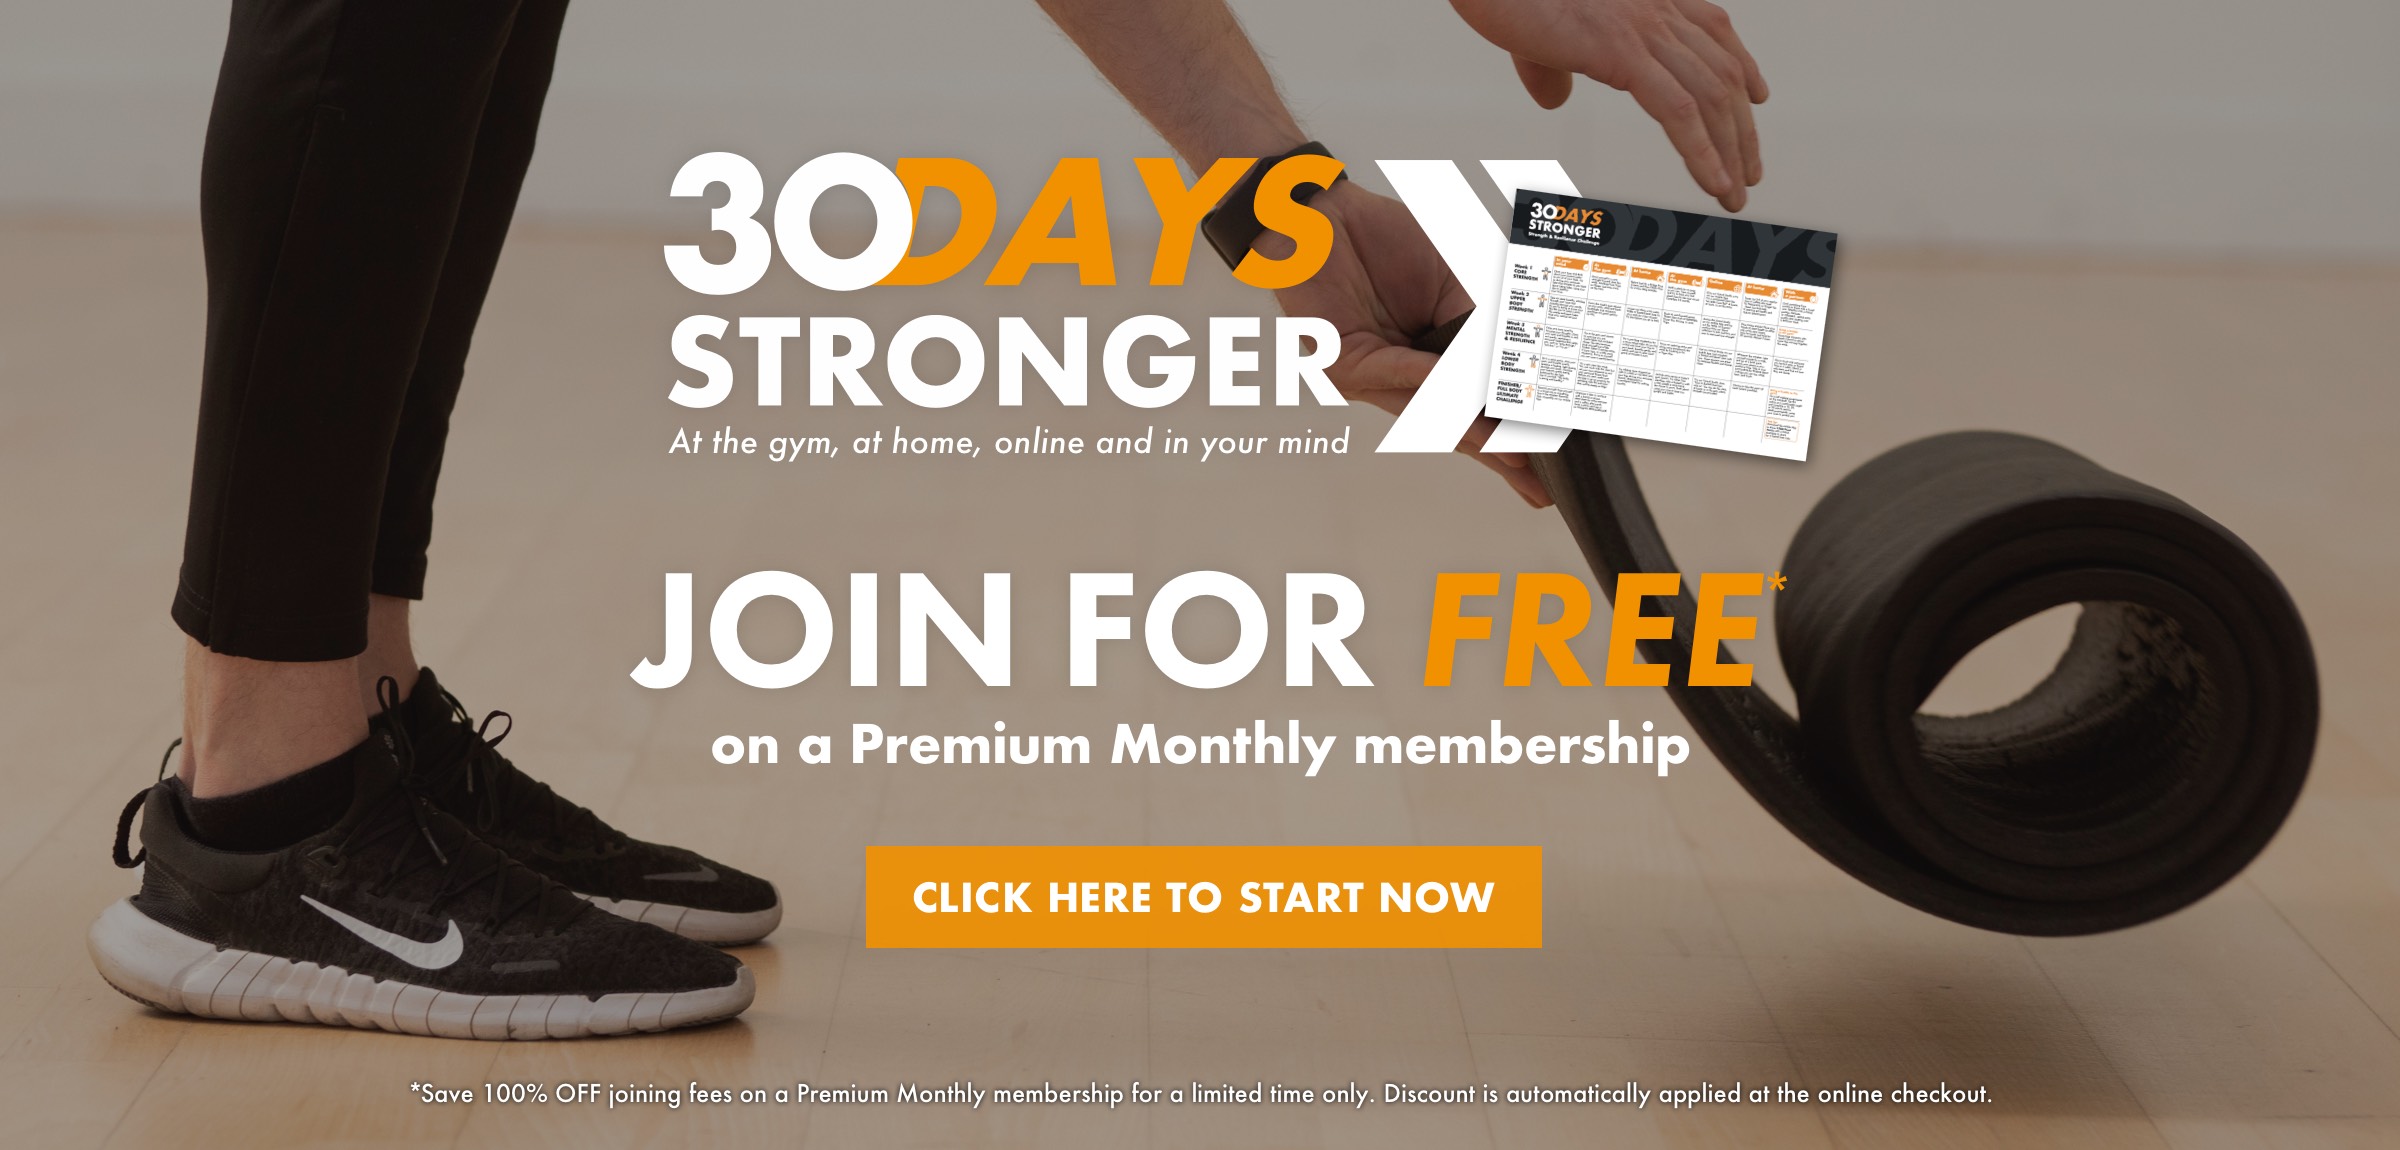 30 Days Stronger - Join Gym for £10